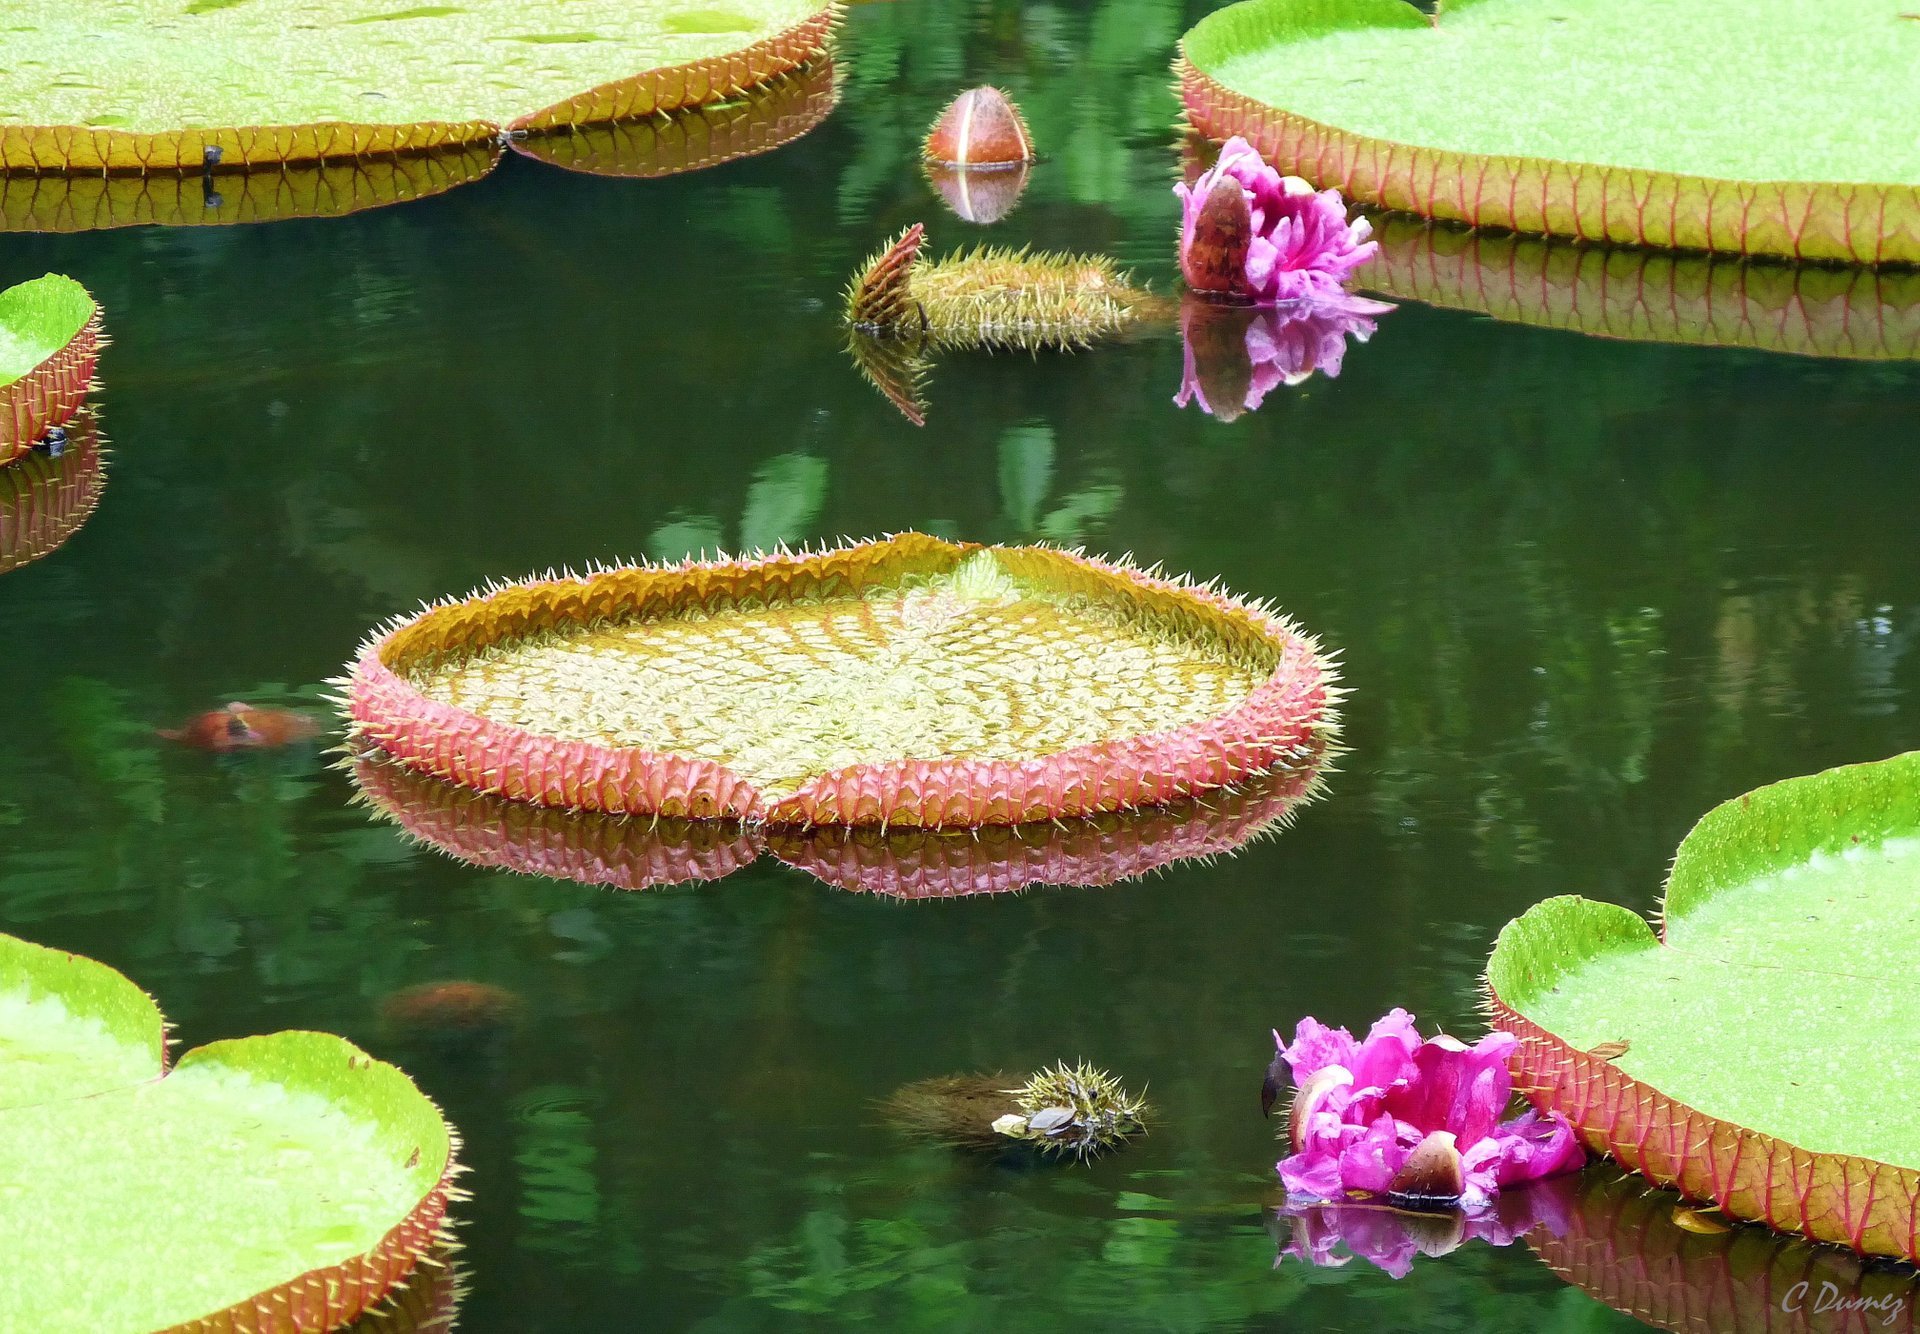 Giant Water Lilies